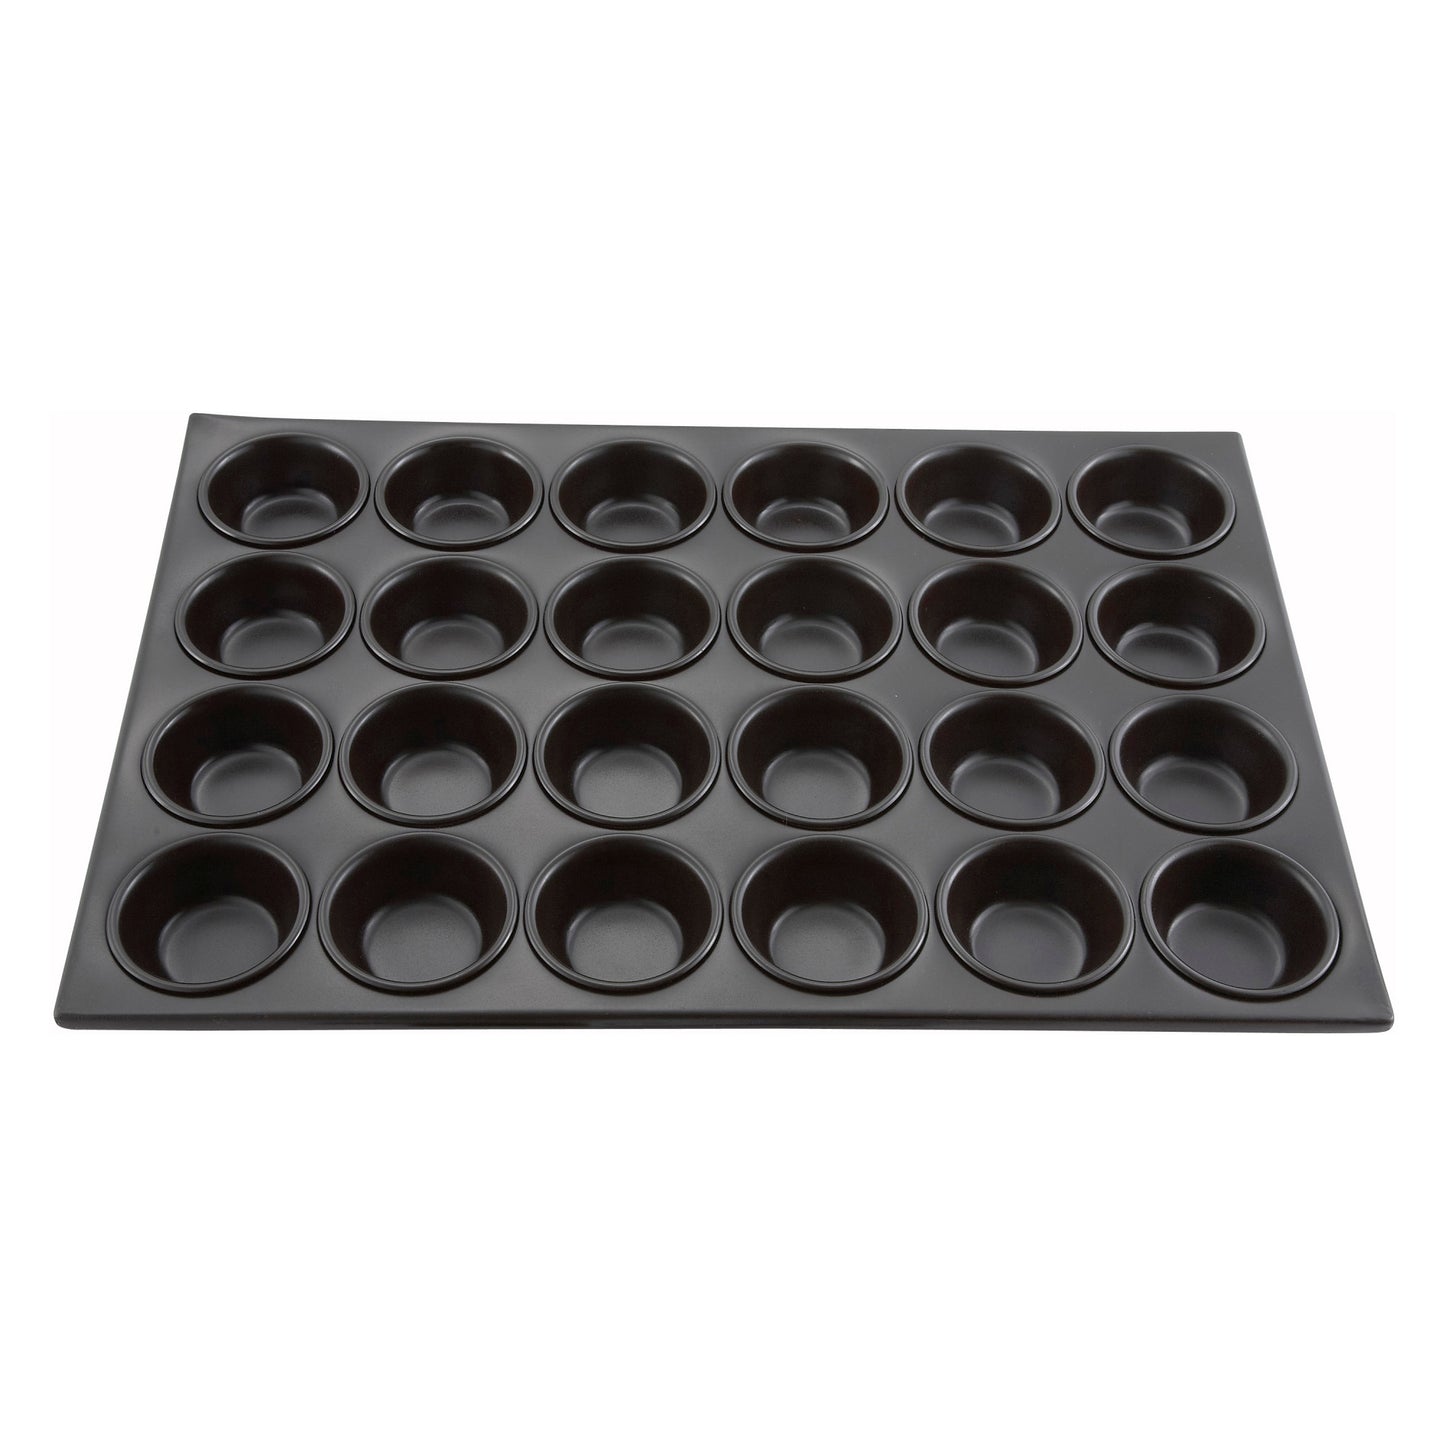 24-Cup Non-Stick Muffin Pan - 3 oz